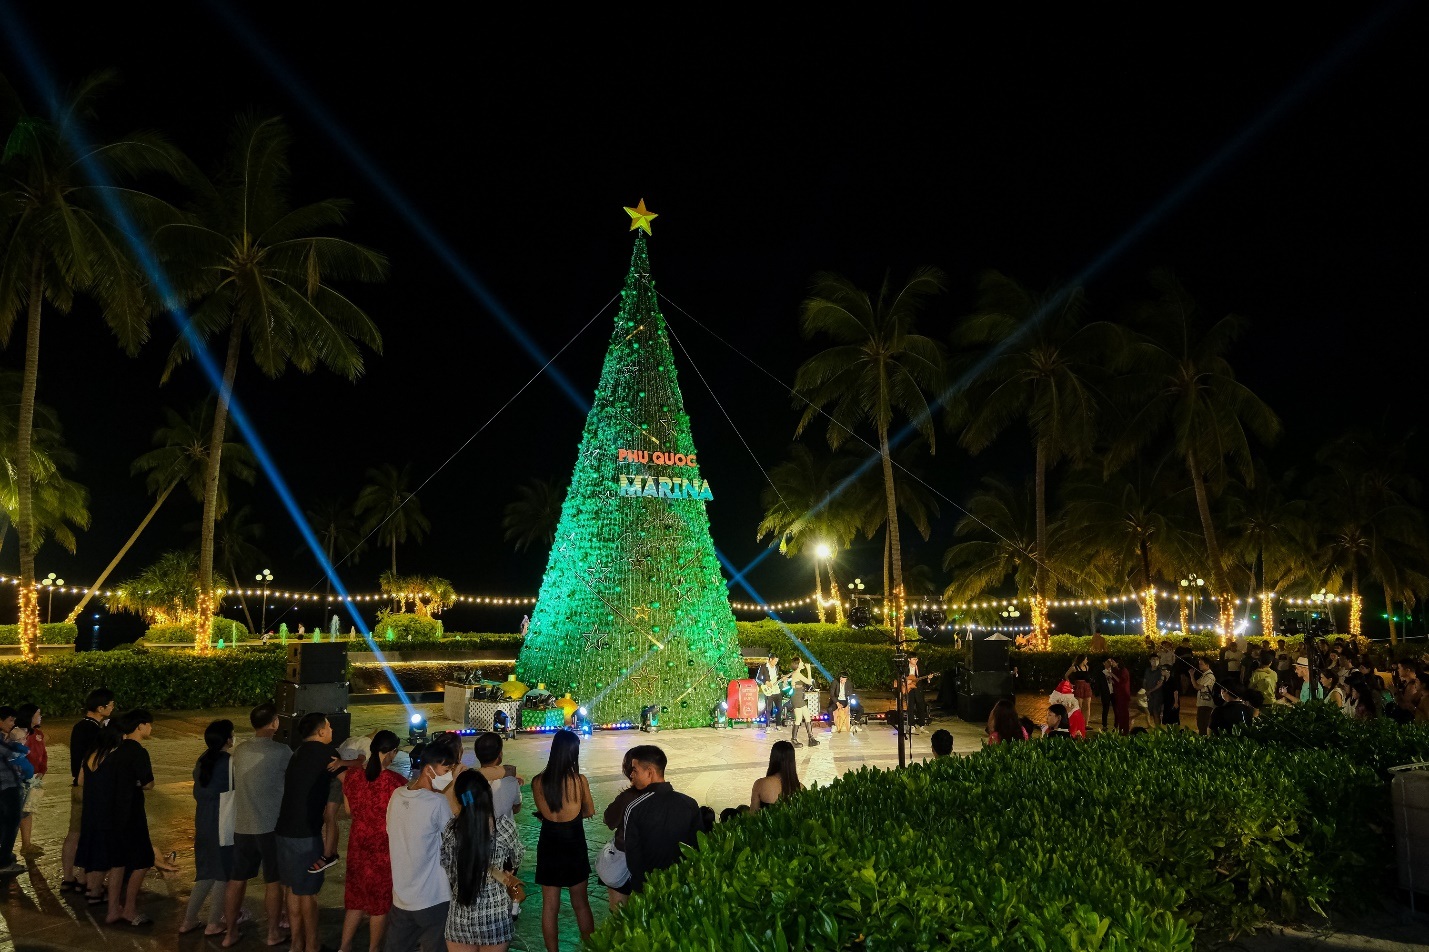 12m high pine tree hangs visitors' New Year wishes